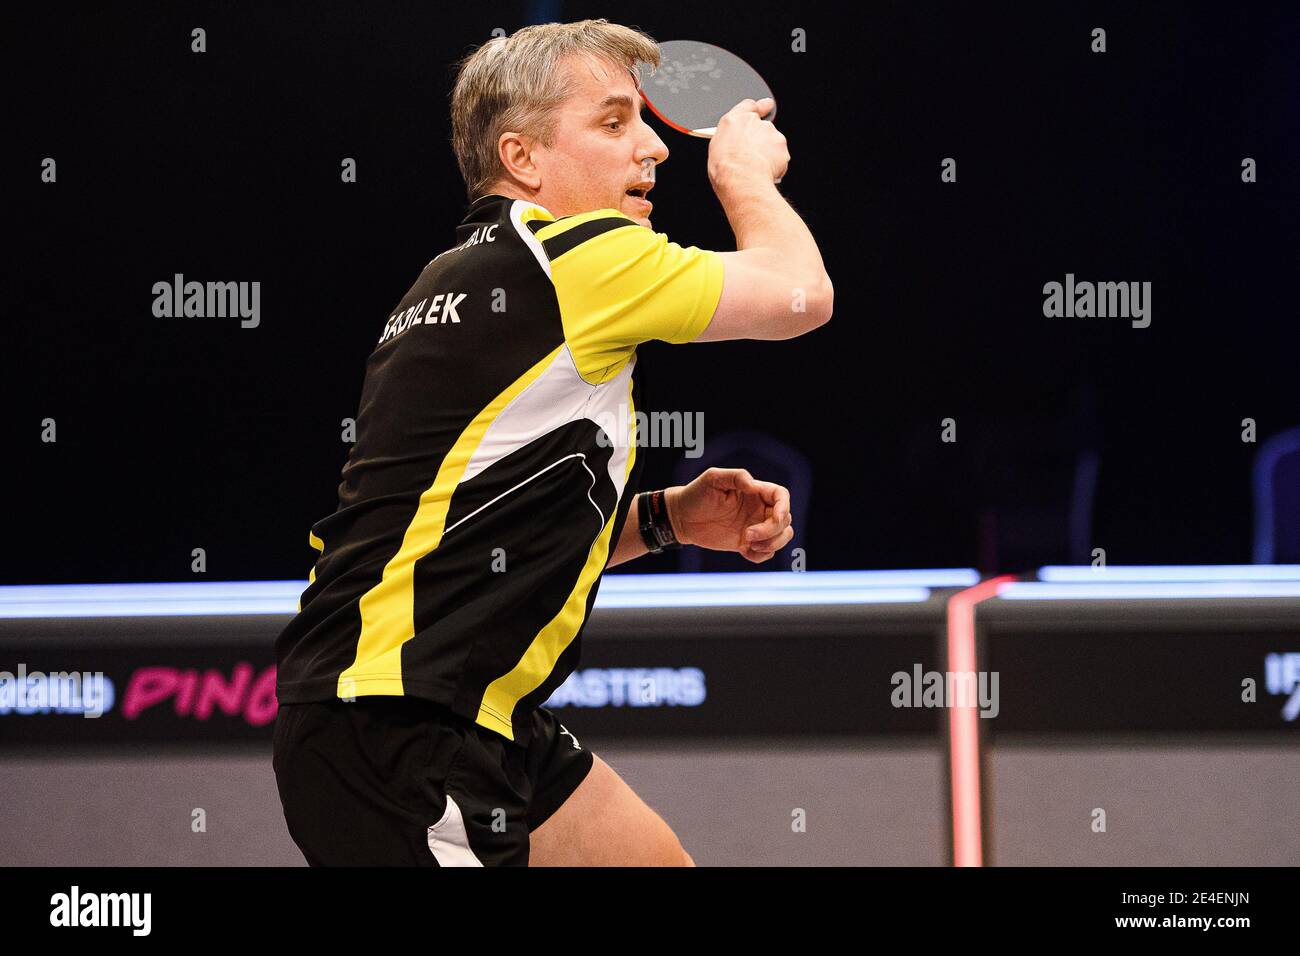 COVENTRY, ROYAUME-UNI. 23 janvier 2021. Tomas Sadilek (CZE) lors de 2021 World Ping pong Masters à Ricoh Arena le samedi 23 janvier 2021 à COVENTRY, ANGLETERRE. Credit: Taka G Wu/Alay Live News Banque D'Images